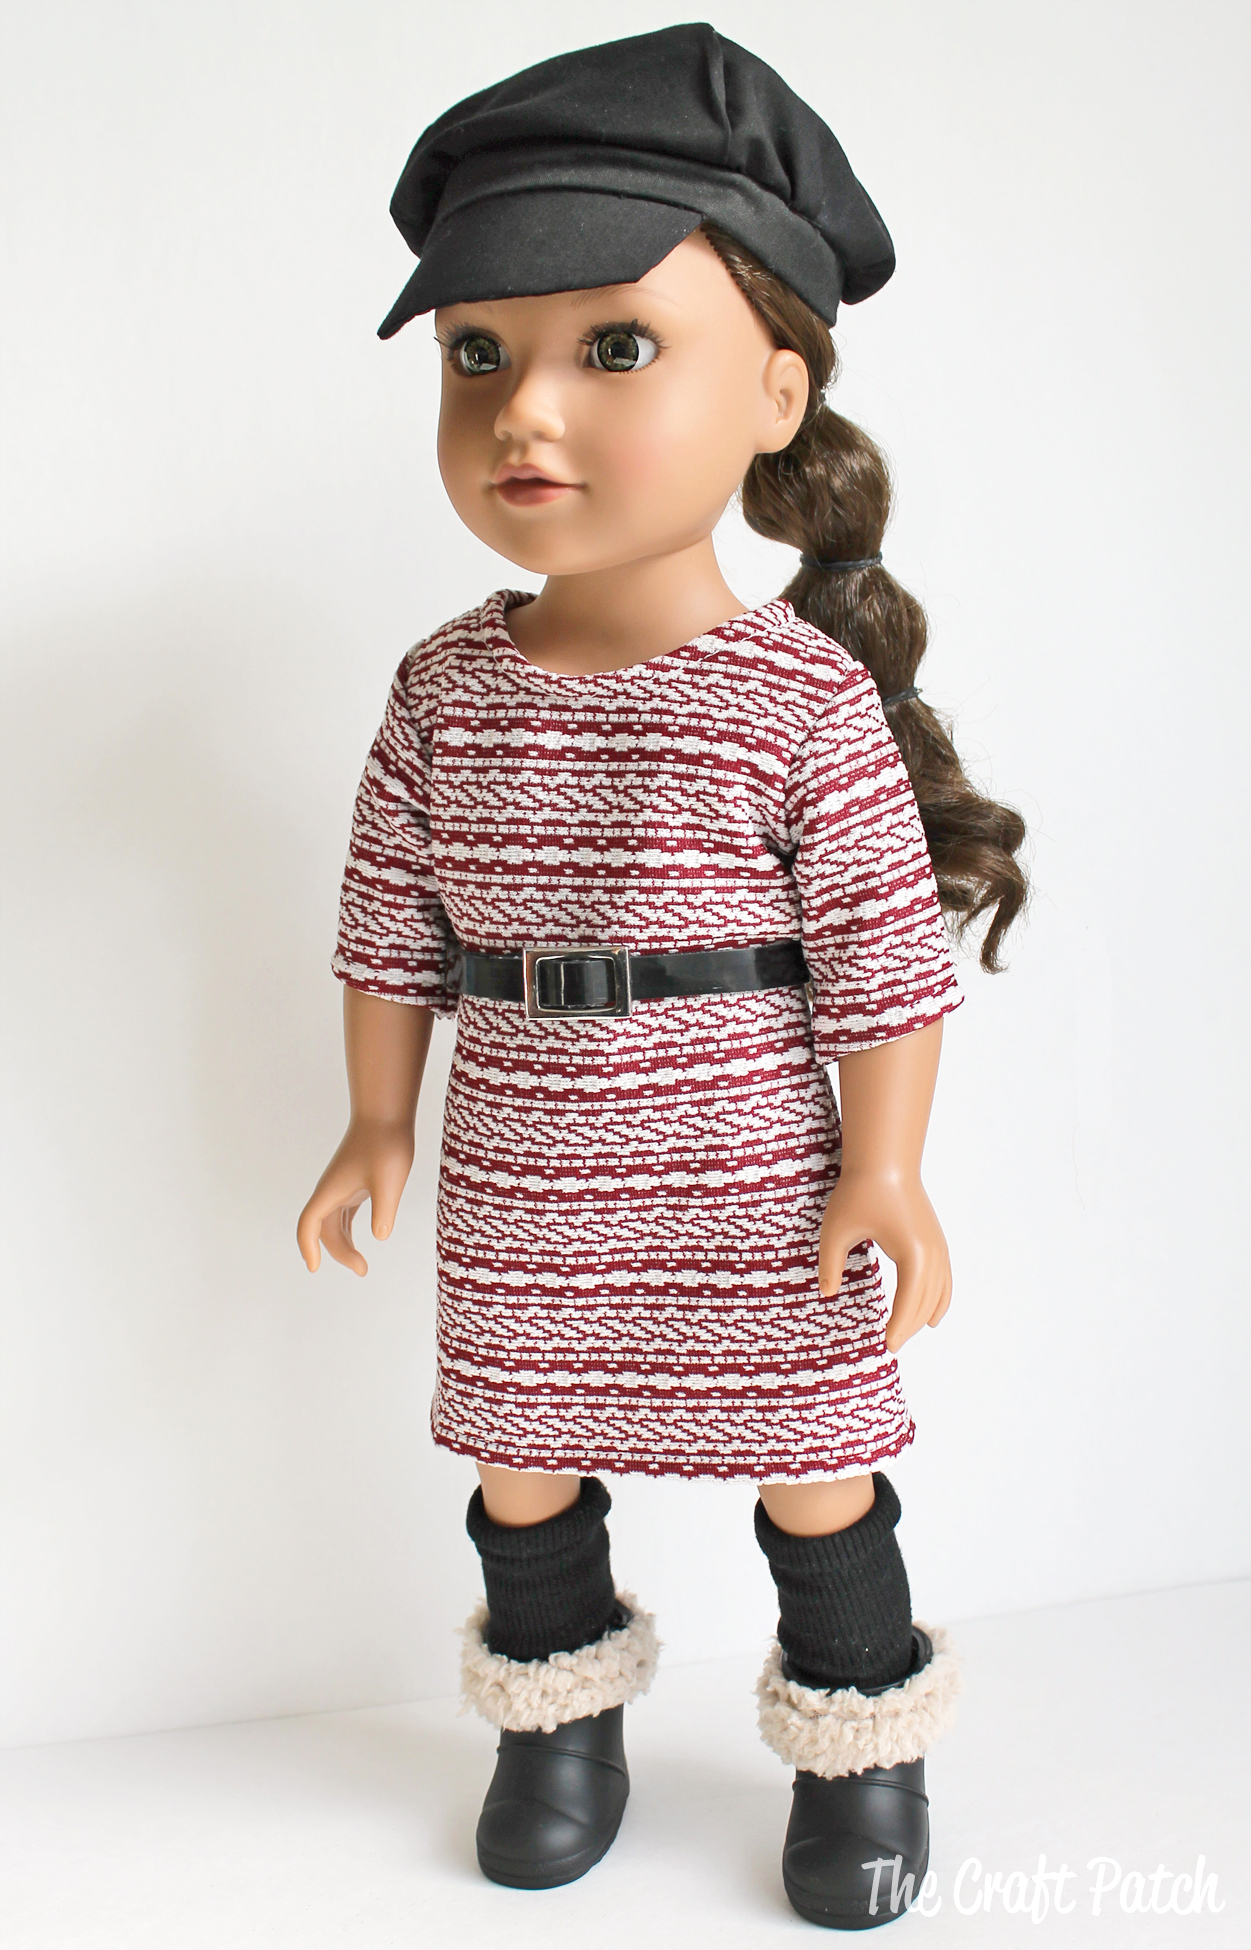 knitted doll dress